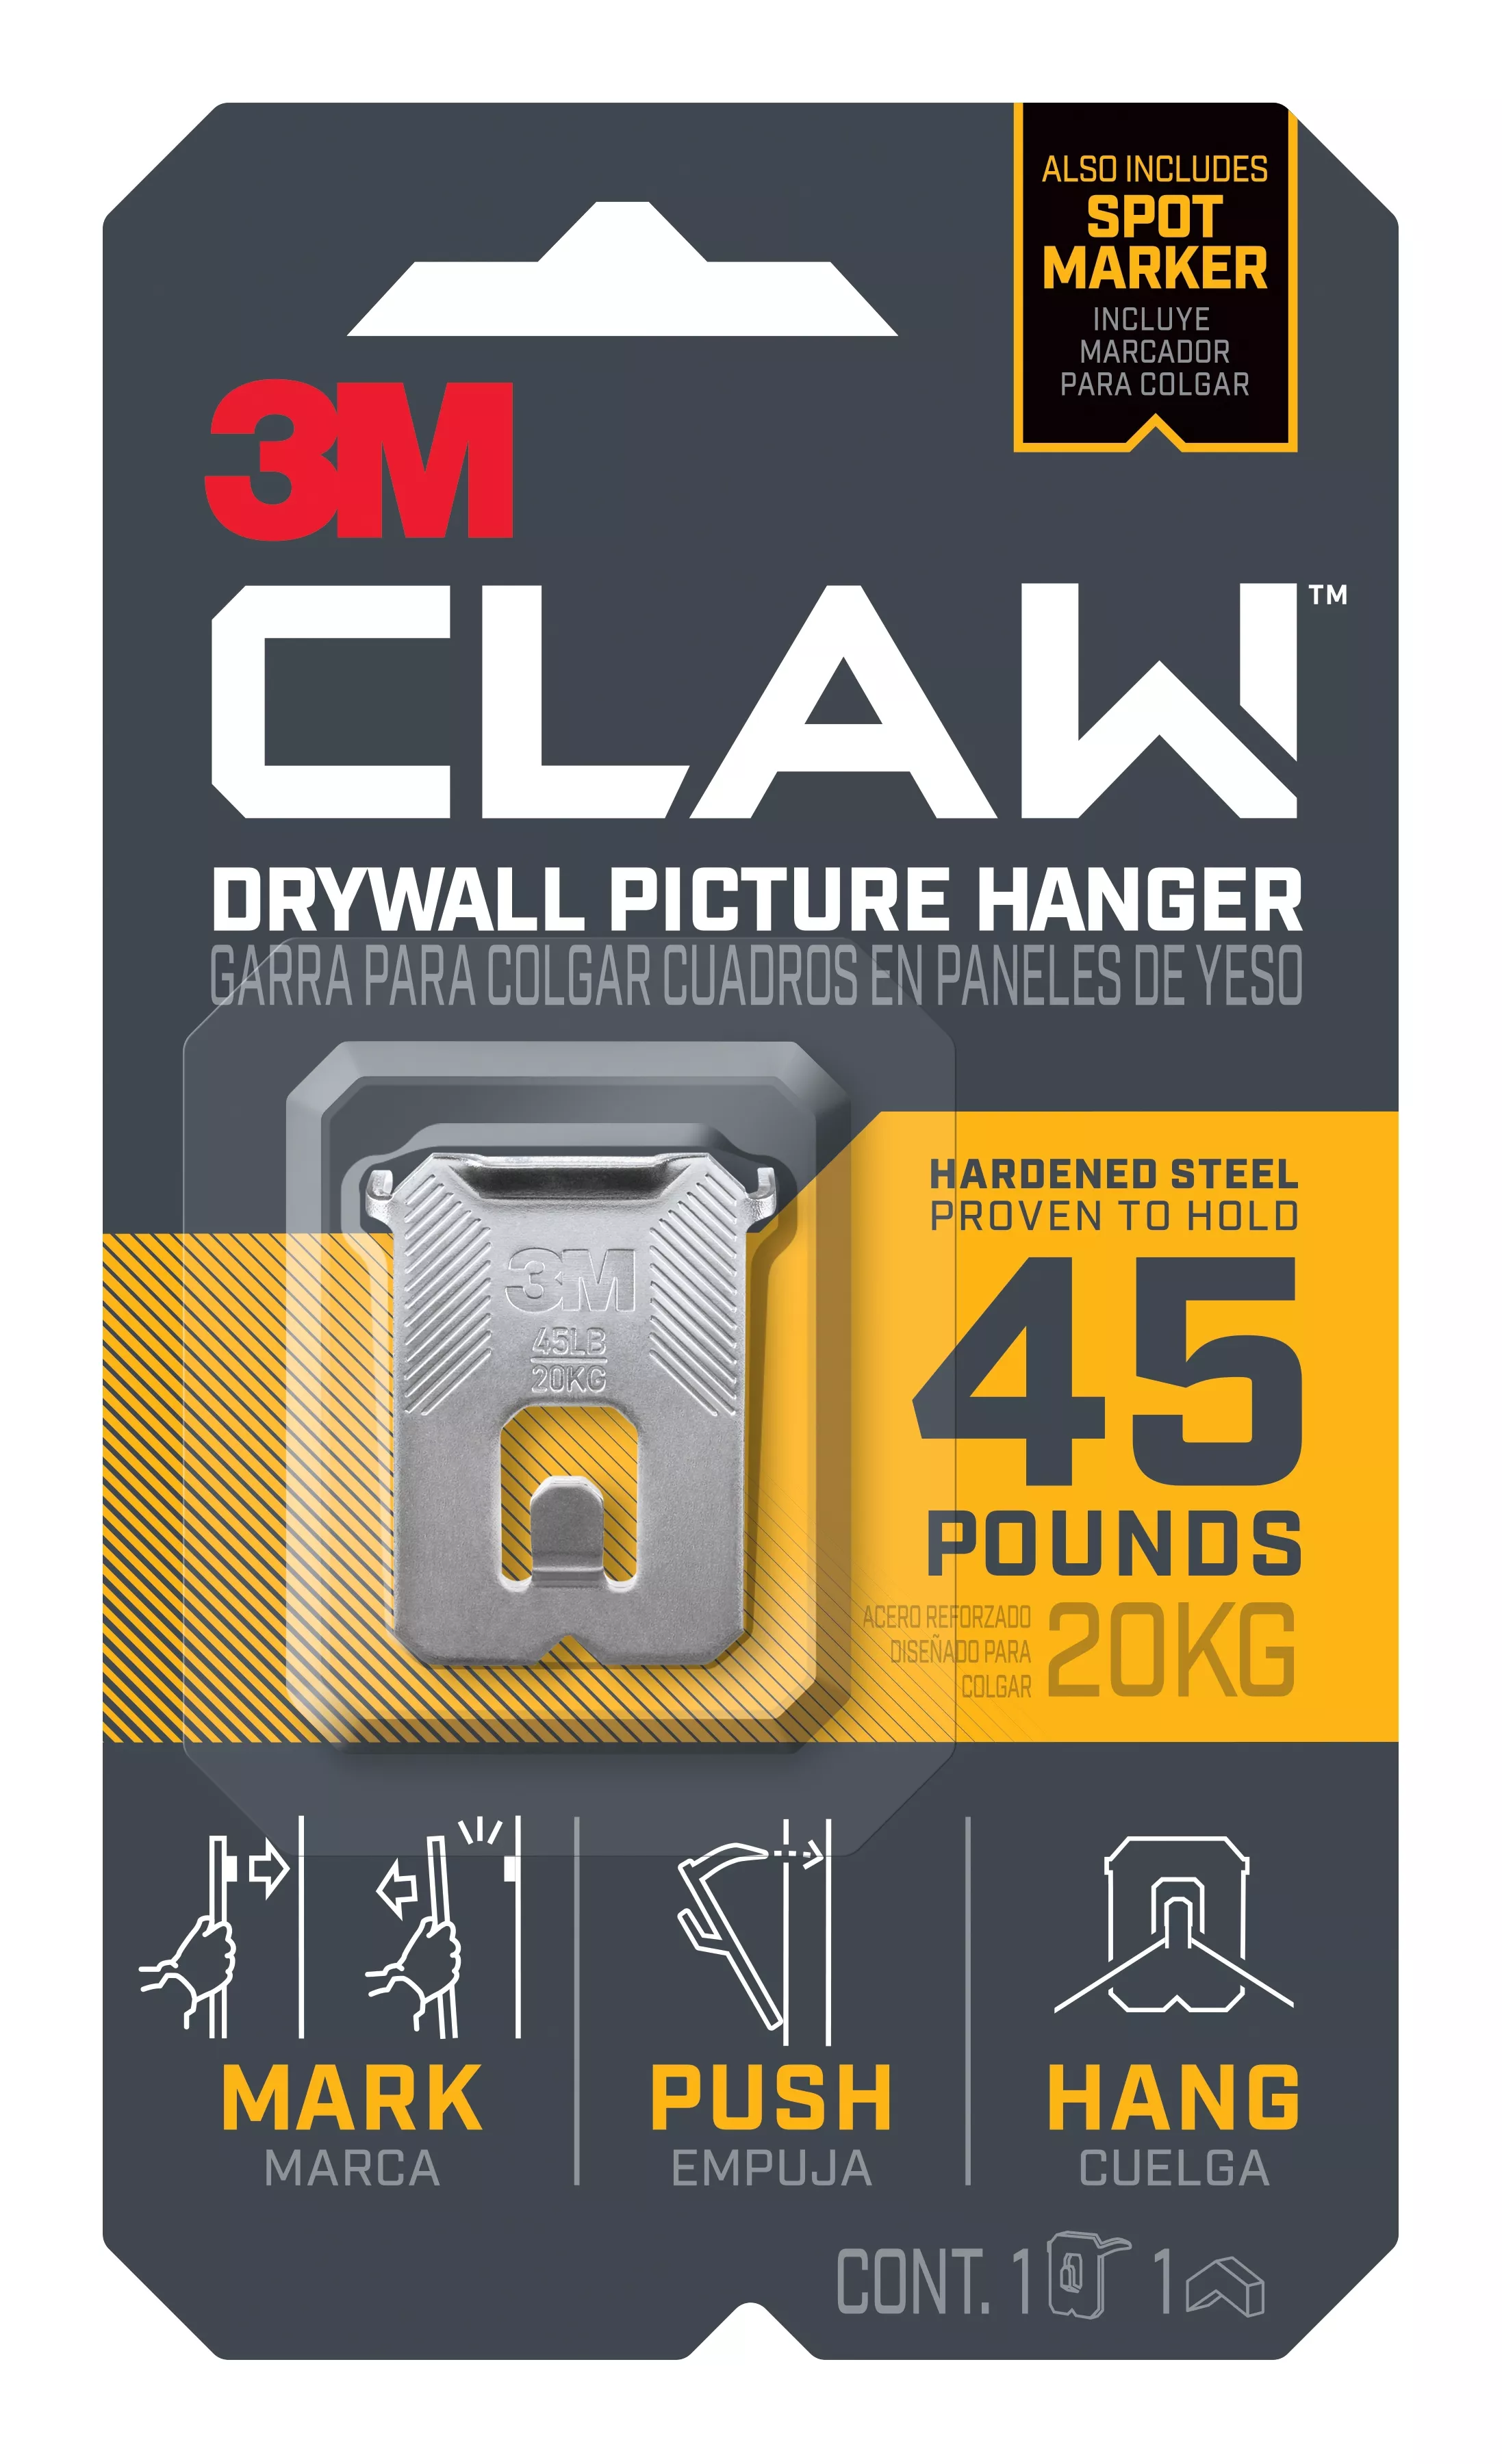 3M™ CLAW™ Drywall Picture Hanger 45 lb with Temporary Spot Marker 3PH45M-1ES, 1 hanger, 1 marker